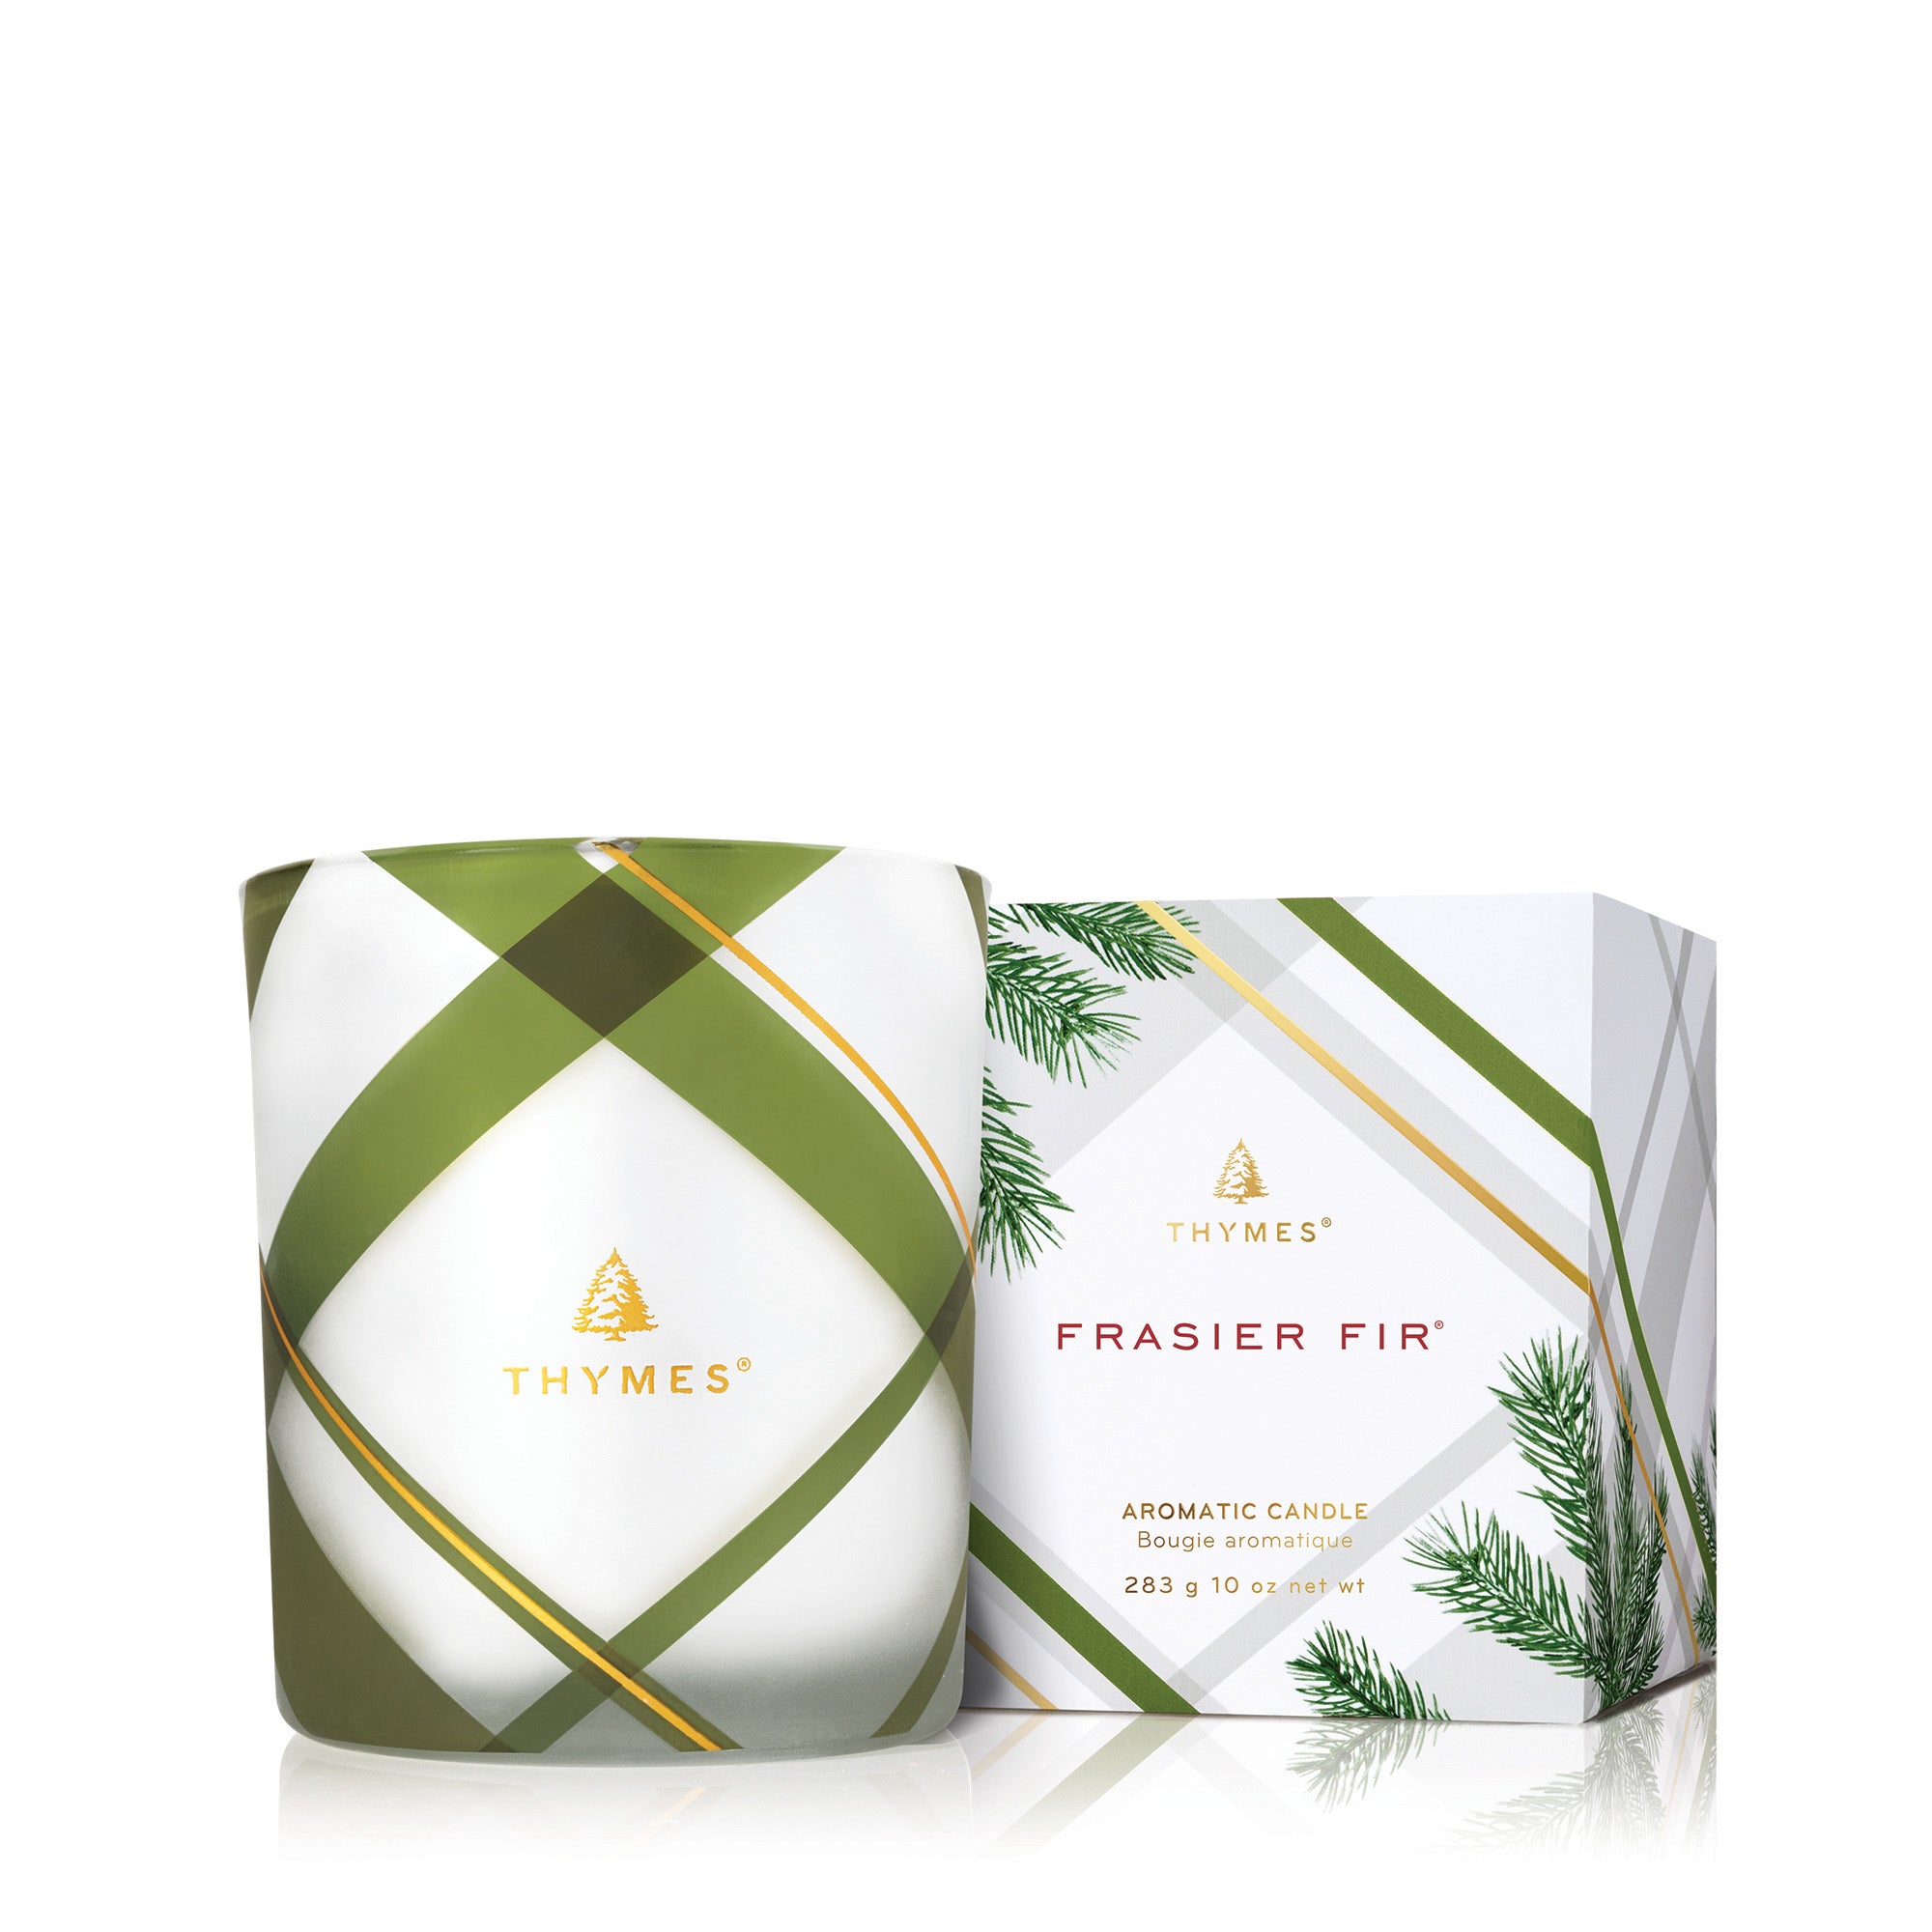 Thymes Fraiser Fir Frosted Plaid Medium Poured Candle